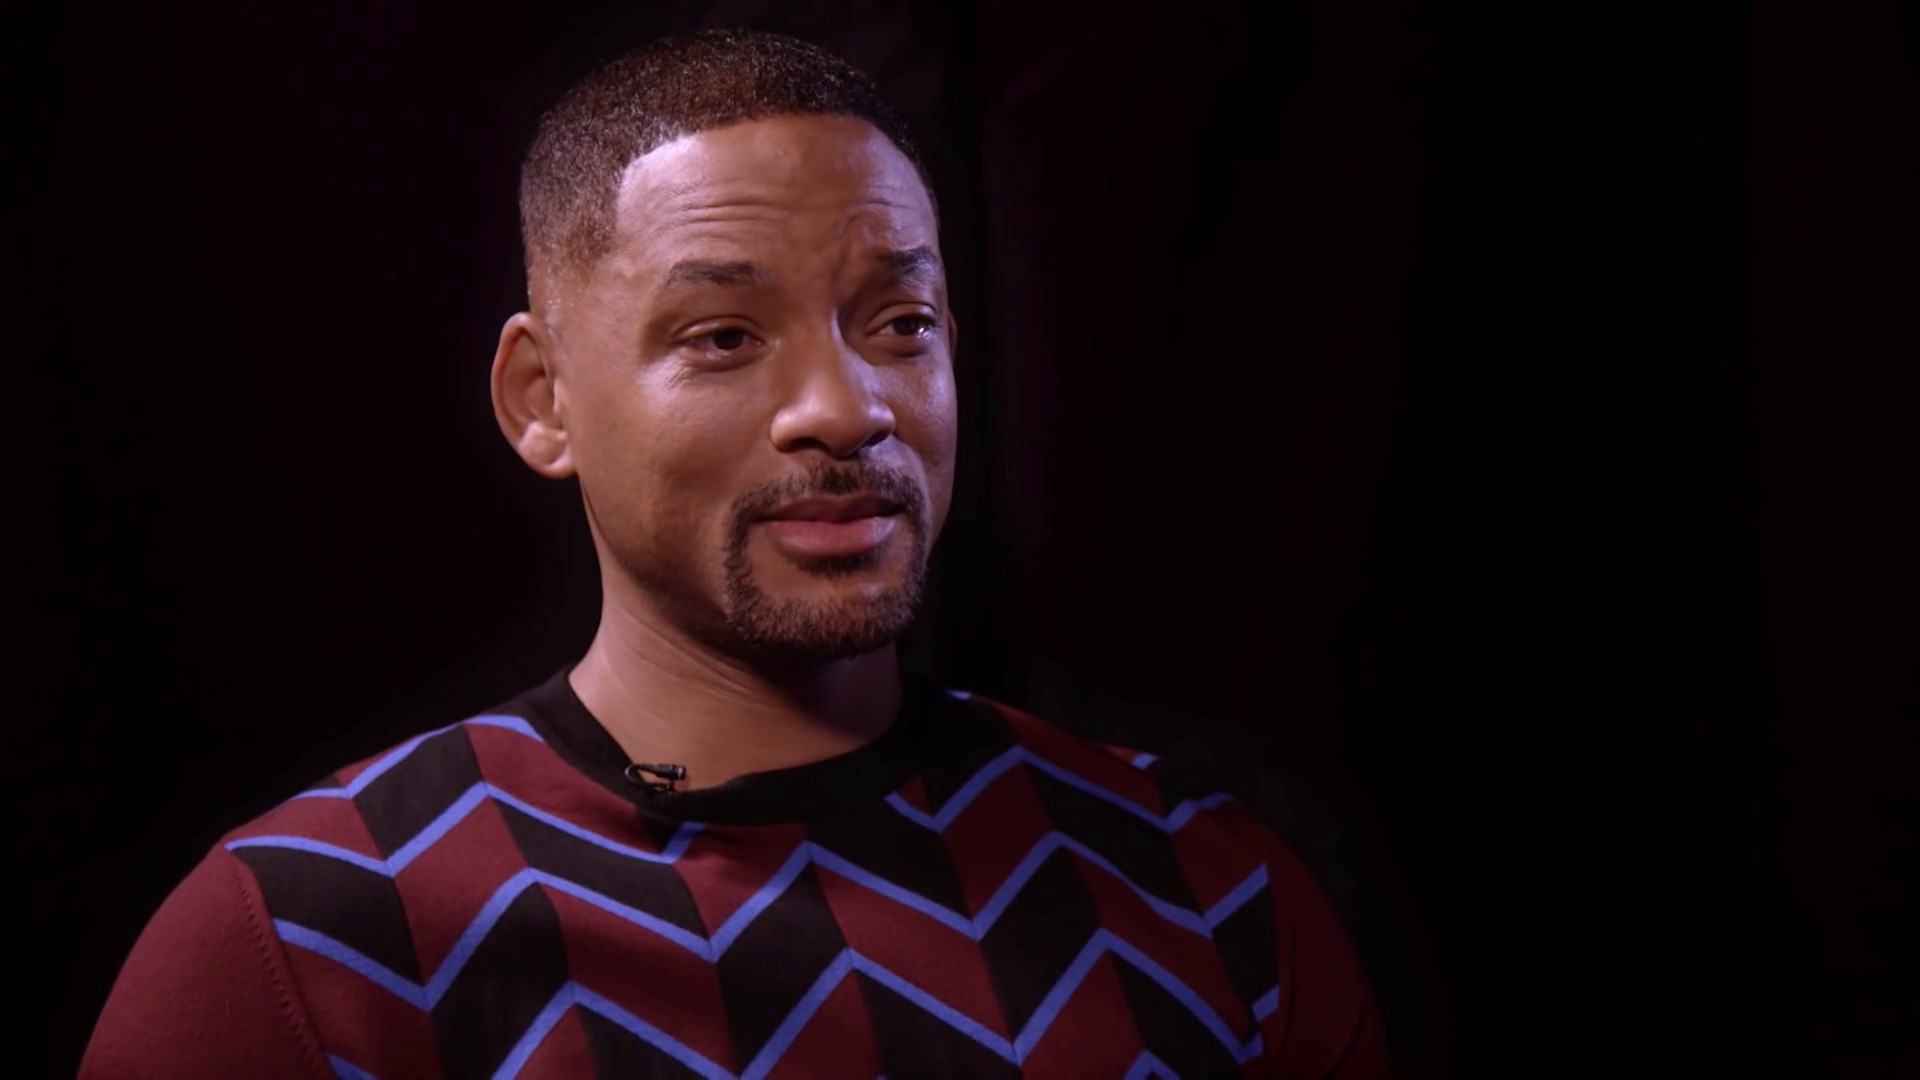 Will Smith During Tv Interview Image - Will Smith - 1920x1080 Wallpaper -  